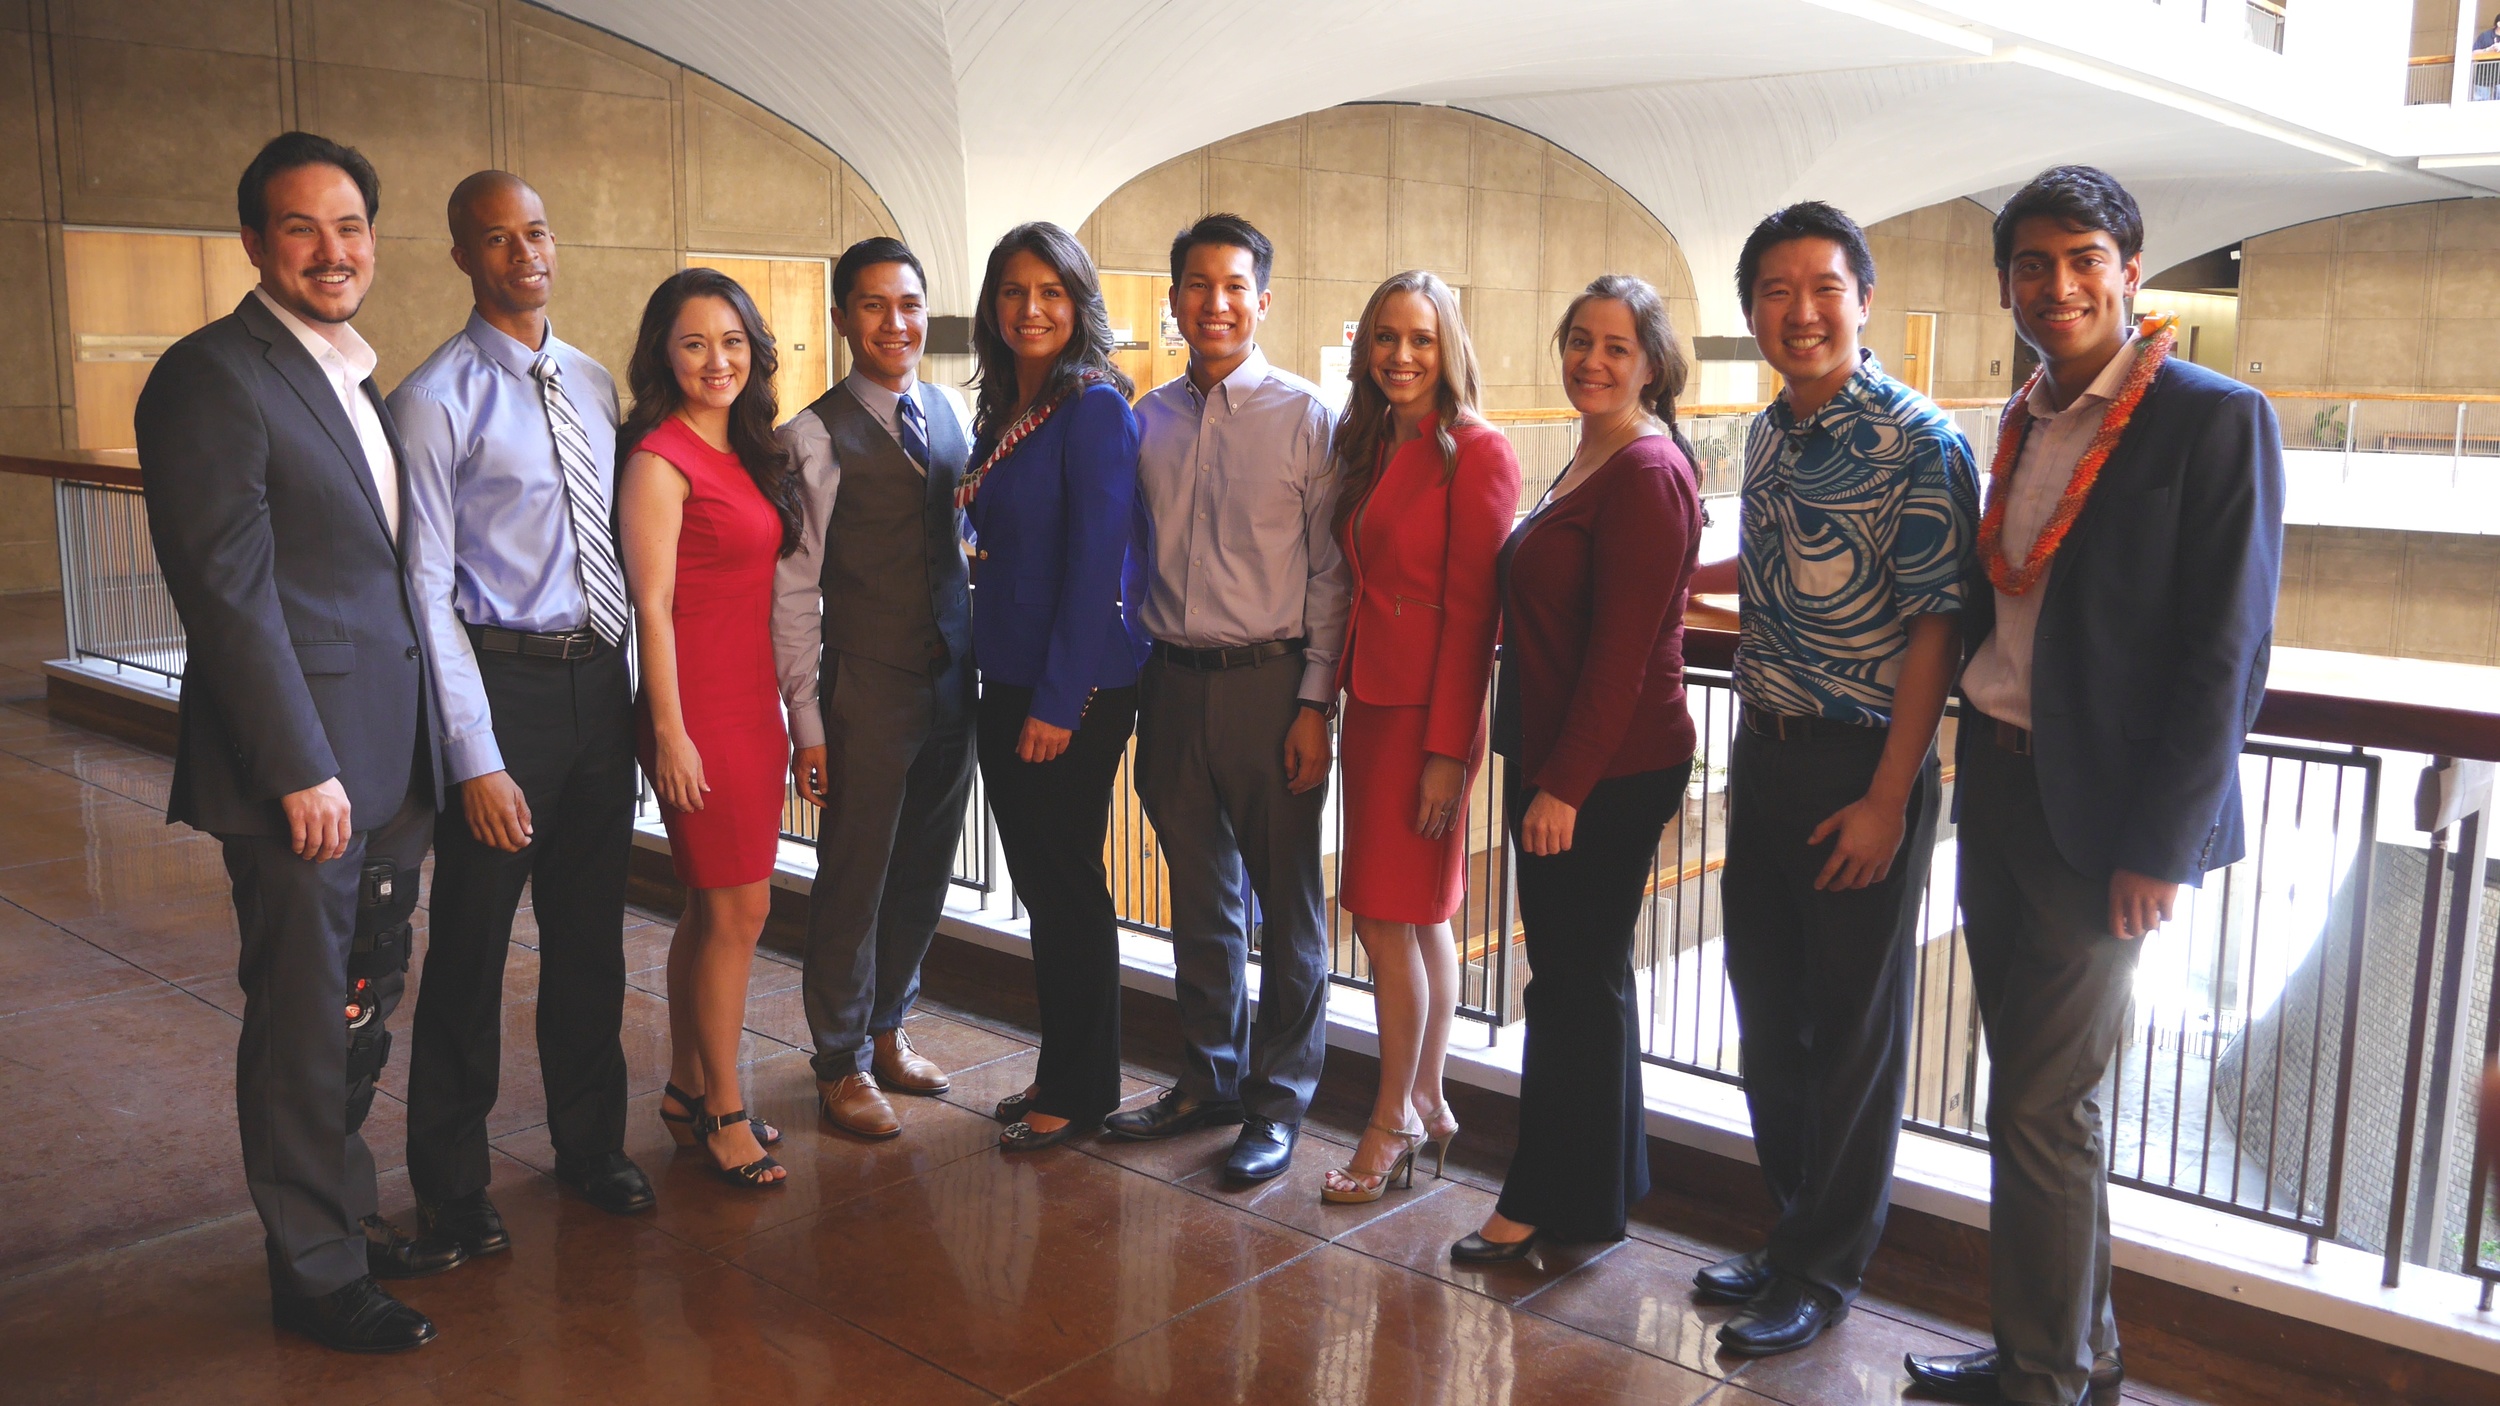 MAP President Steven Olikara, far right, at the launch of the Hawaii Future Caucus this past February with Fukumoto, third from the left.